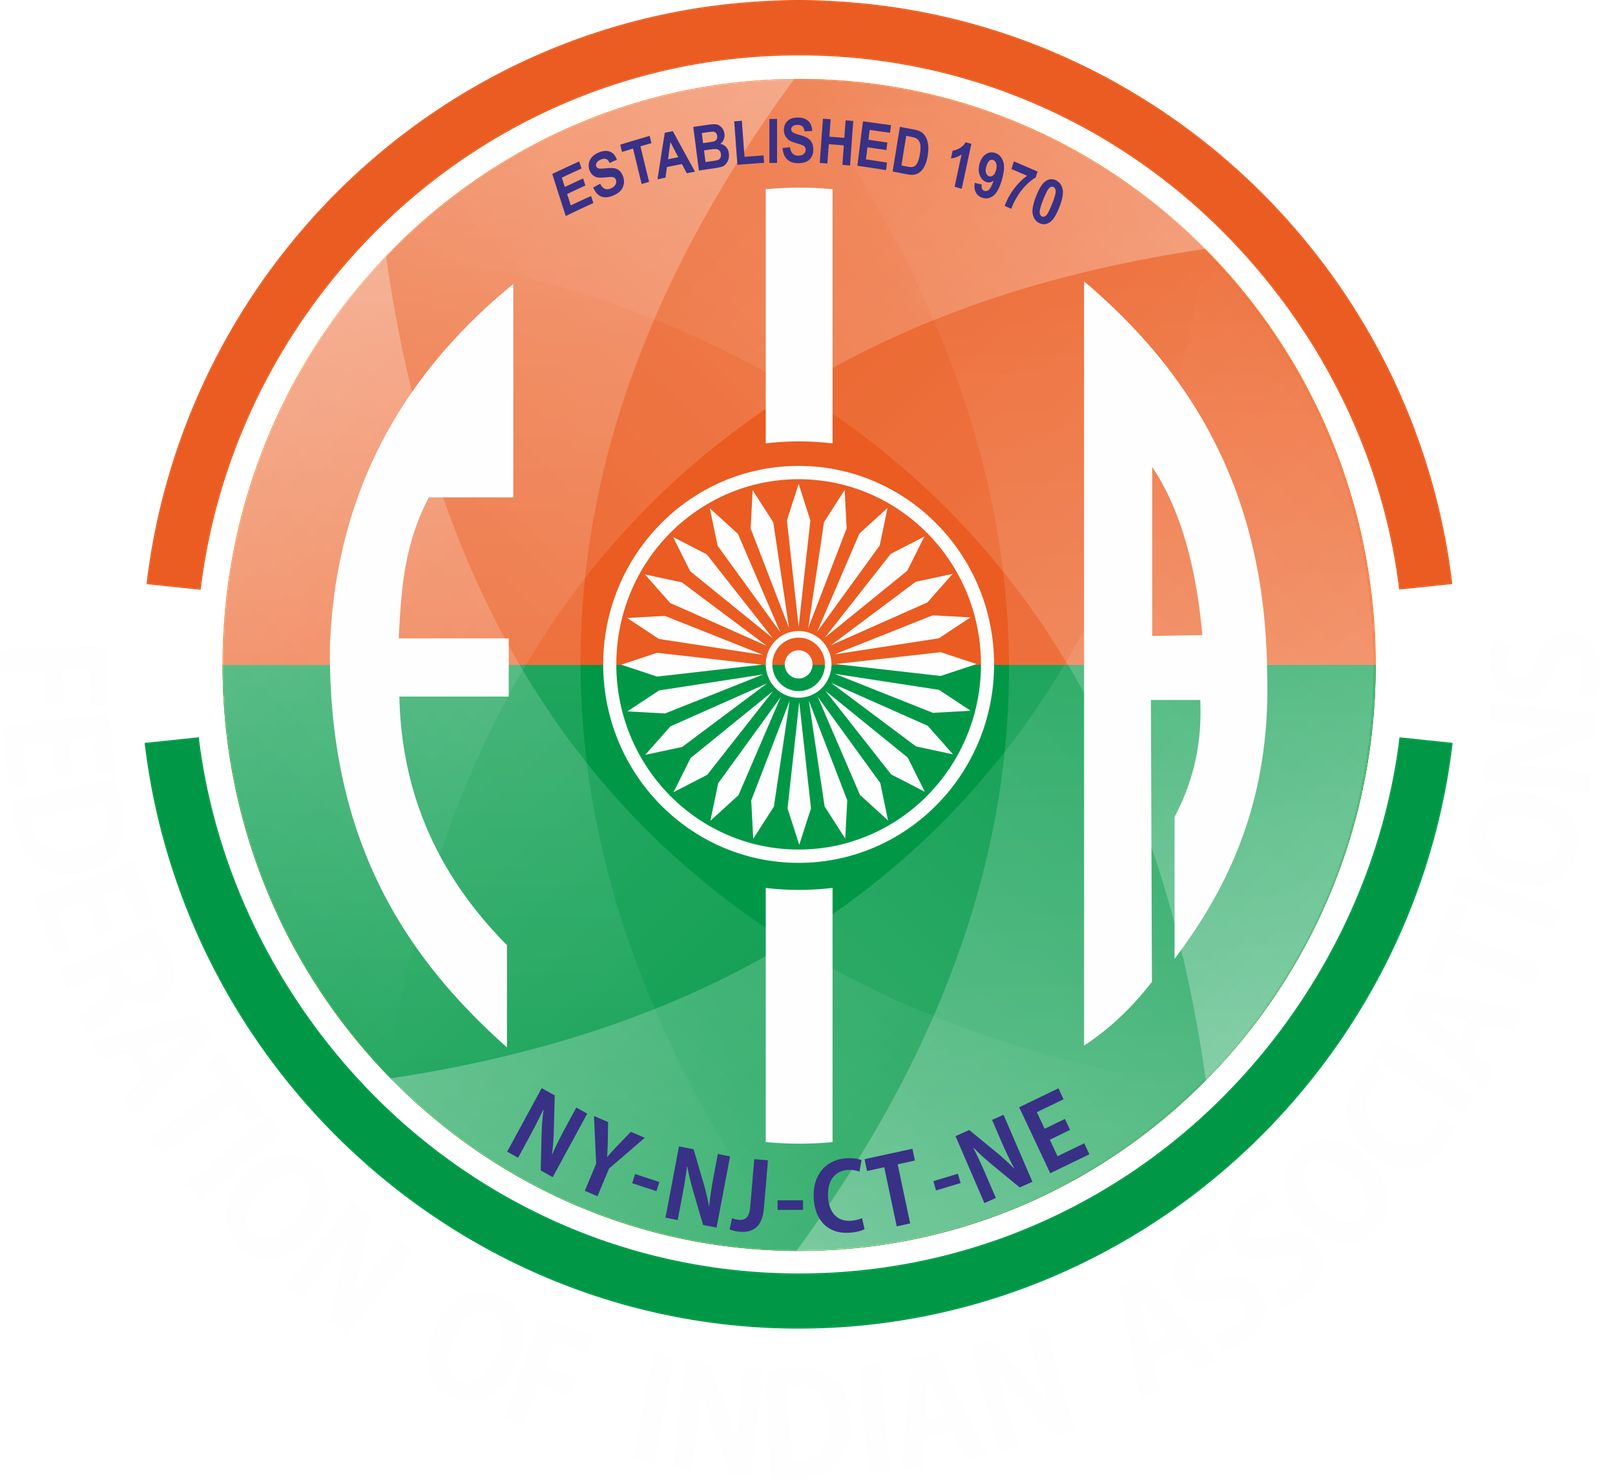 Federation of Indian Associations